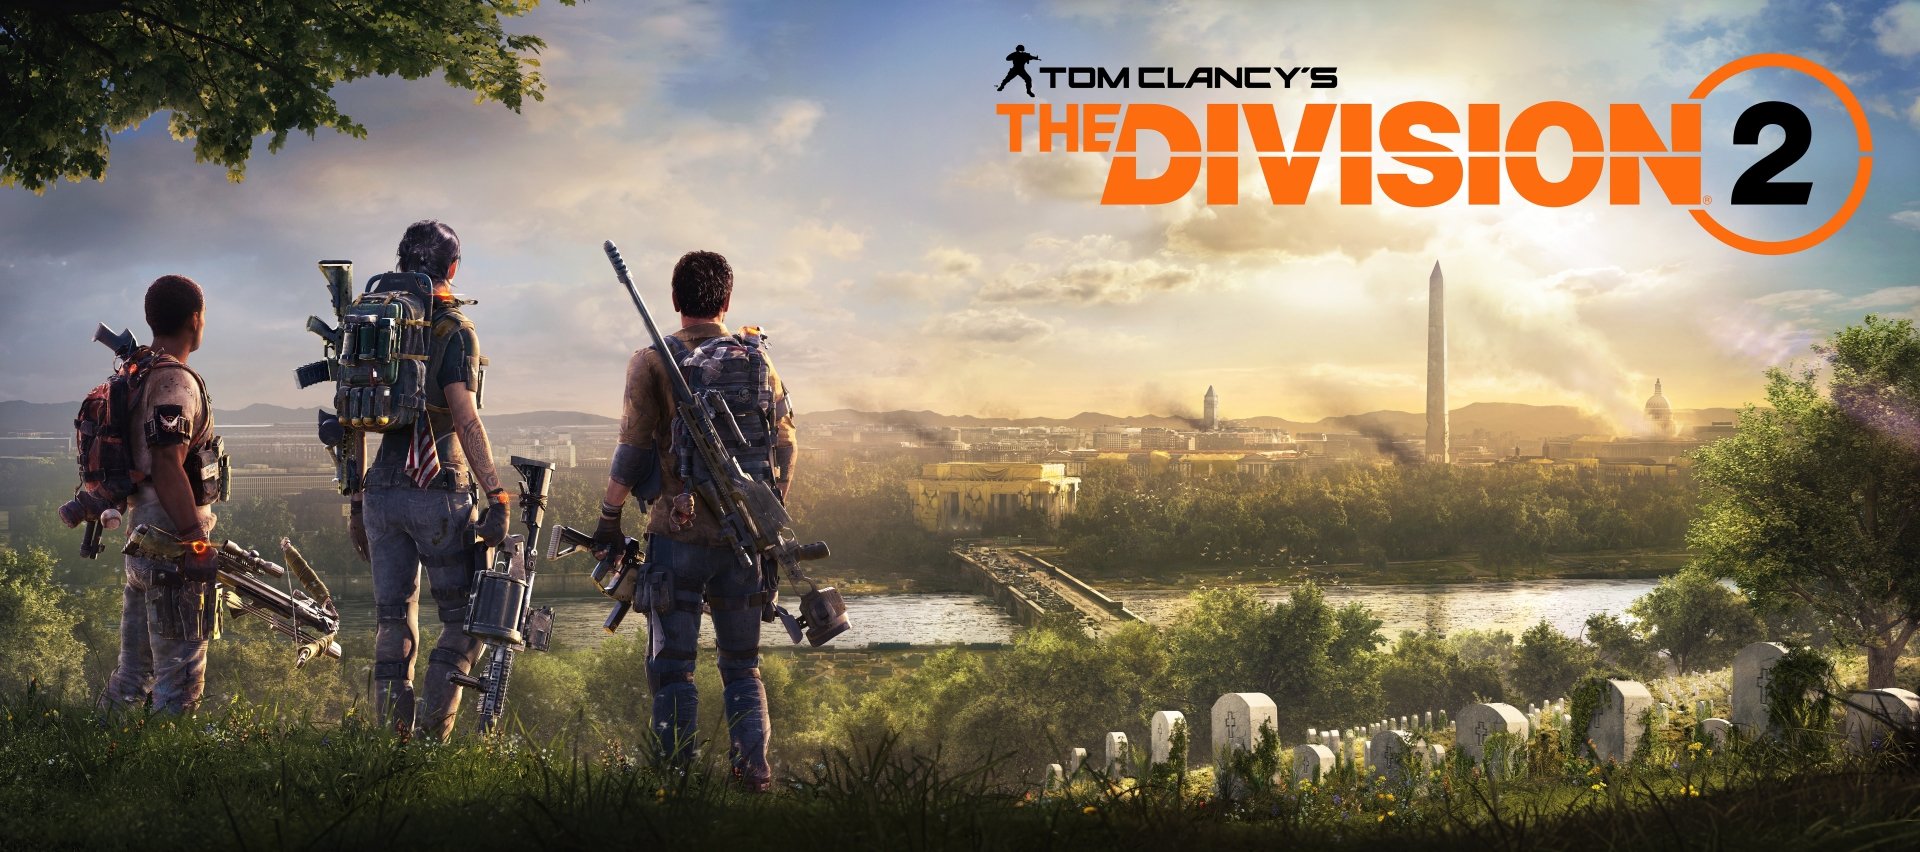 80 Tom Clancys The Division 2 HD Wallpapers Background Images 1920x852